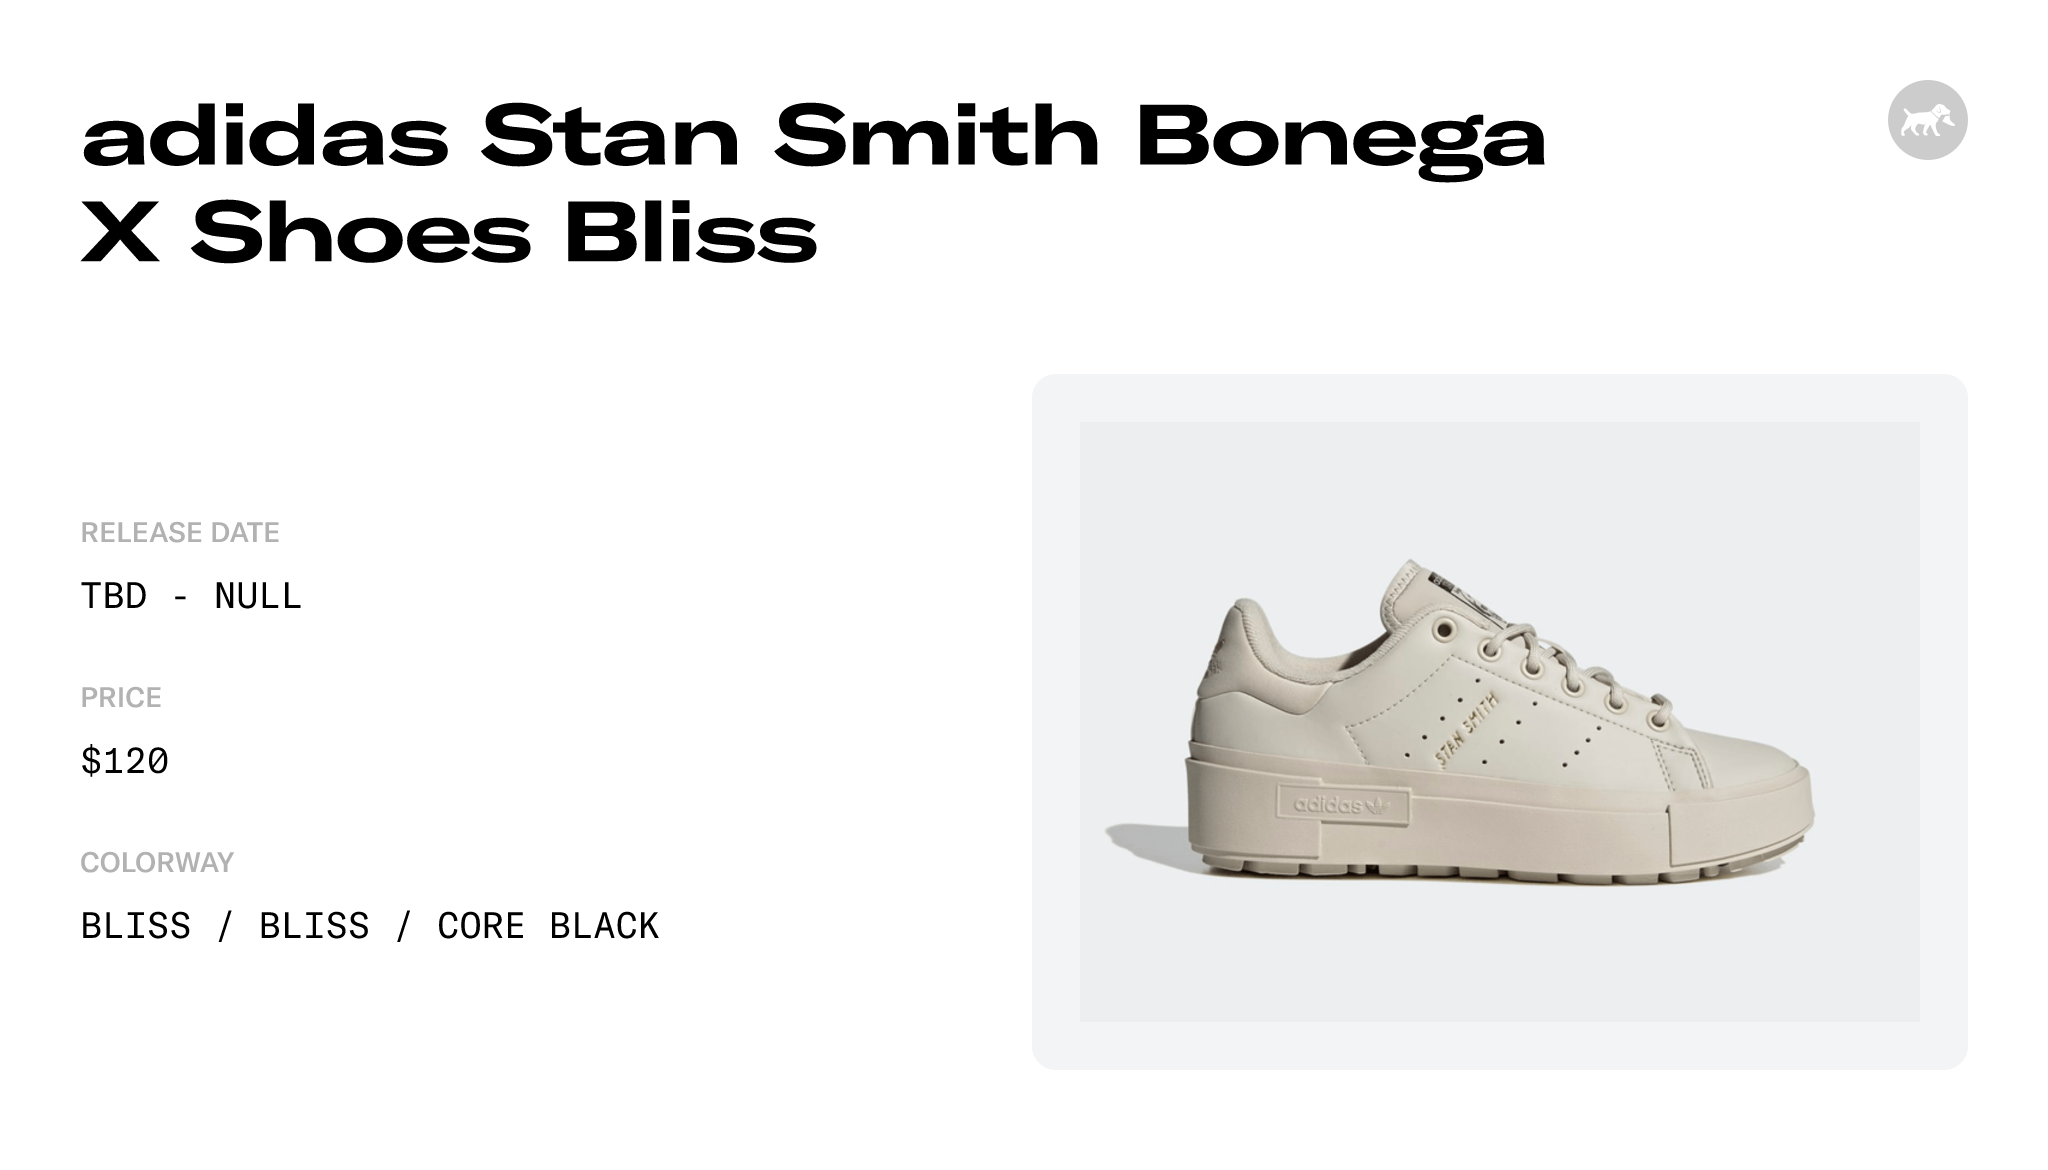 adidas Stan Smith Bonega X Shoes Bliss - GY1499 Raffles and Release Date